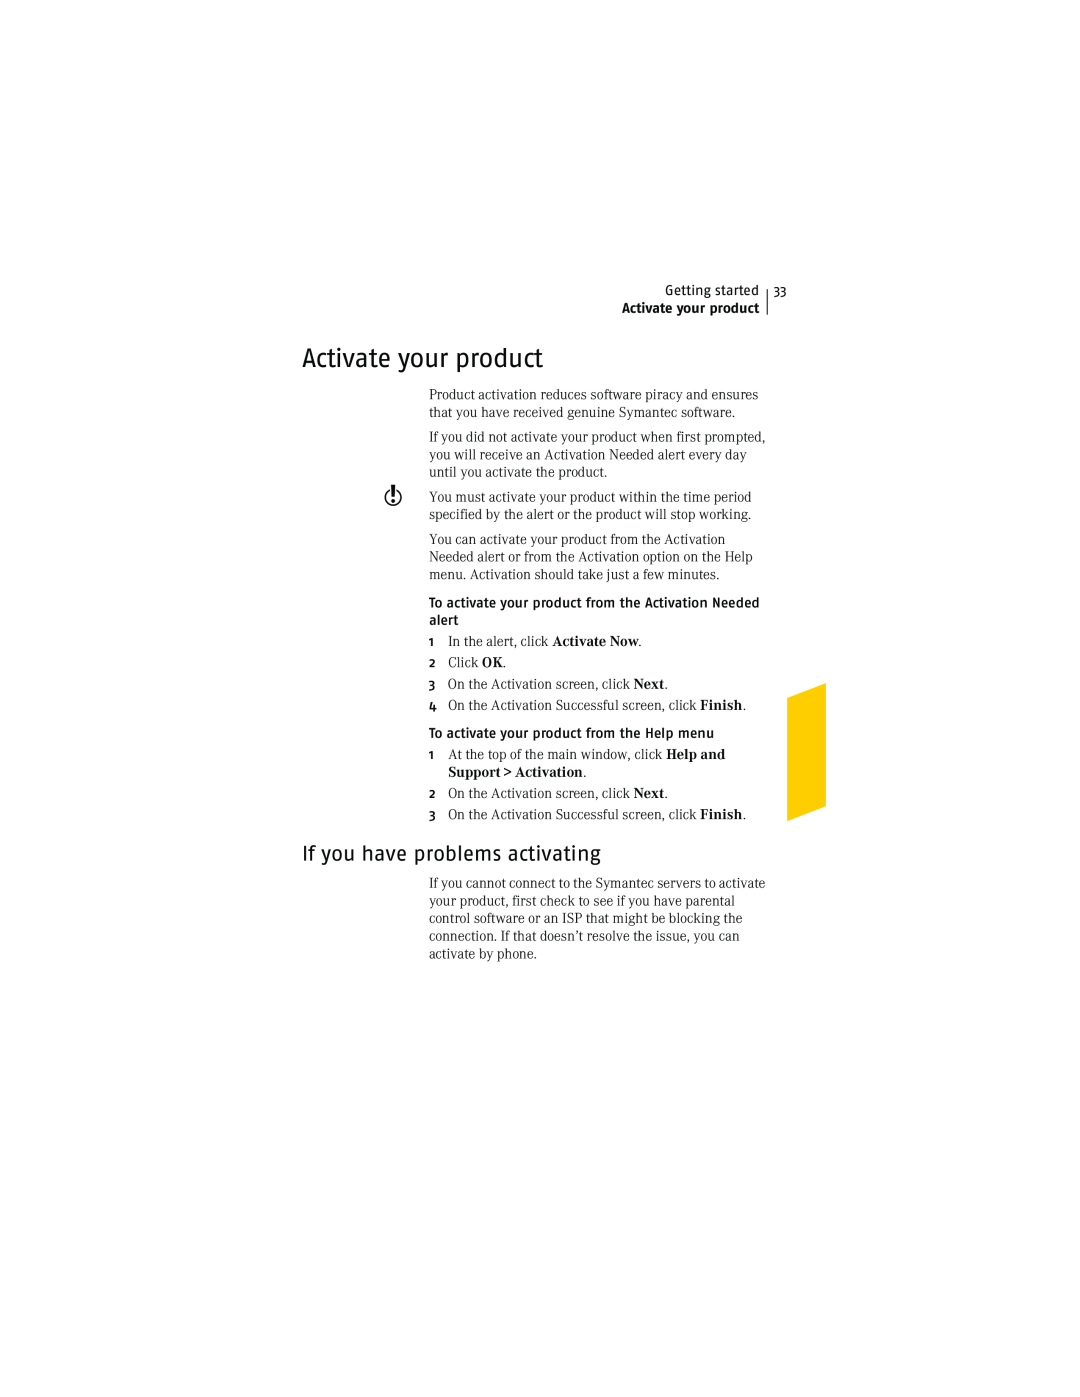 Symantec NIS2005 manual Activate your product, If you have problems activating 